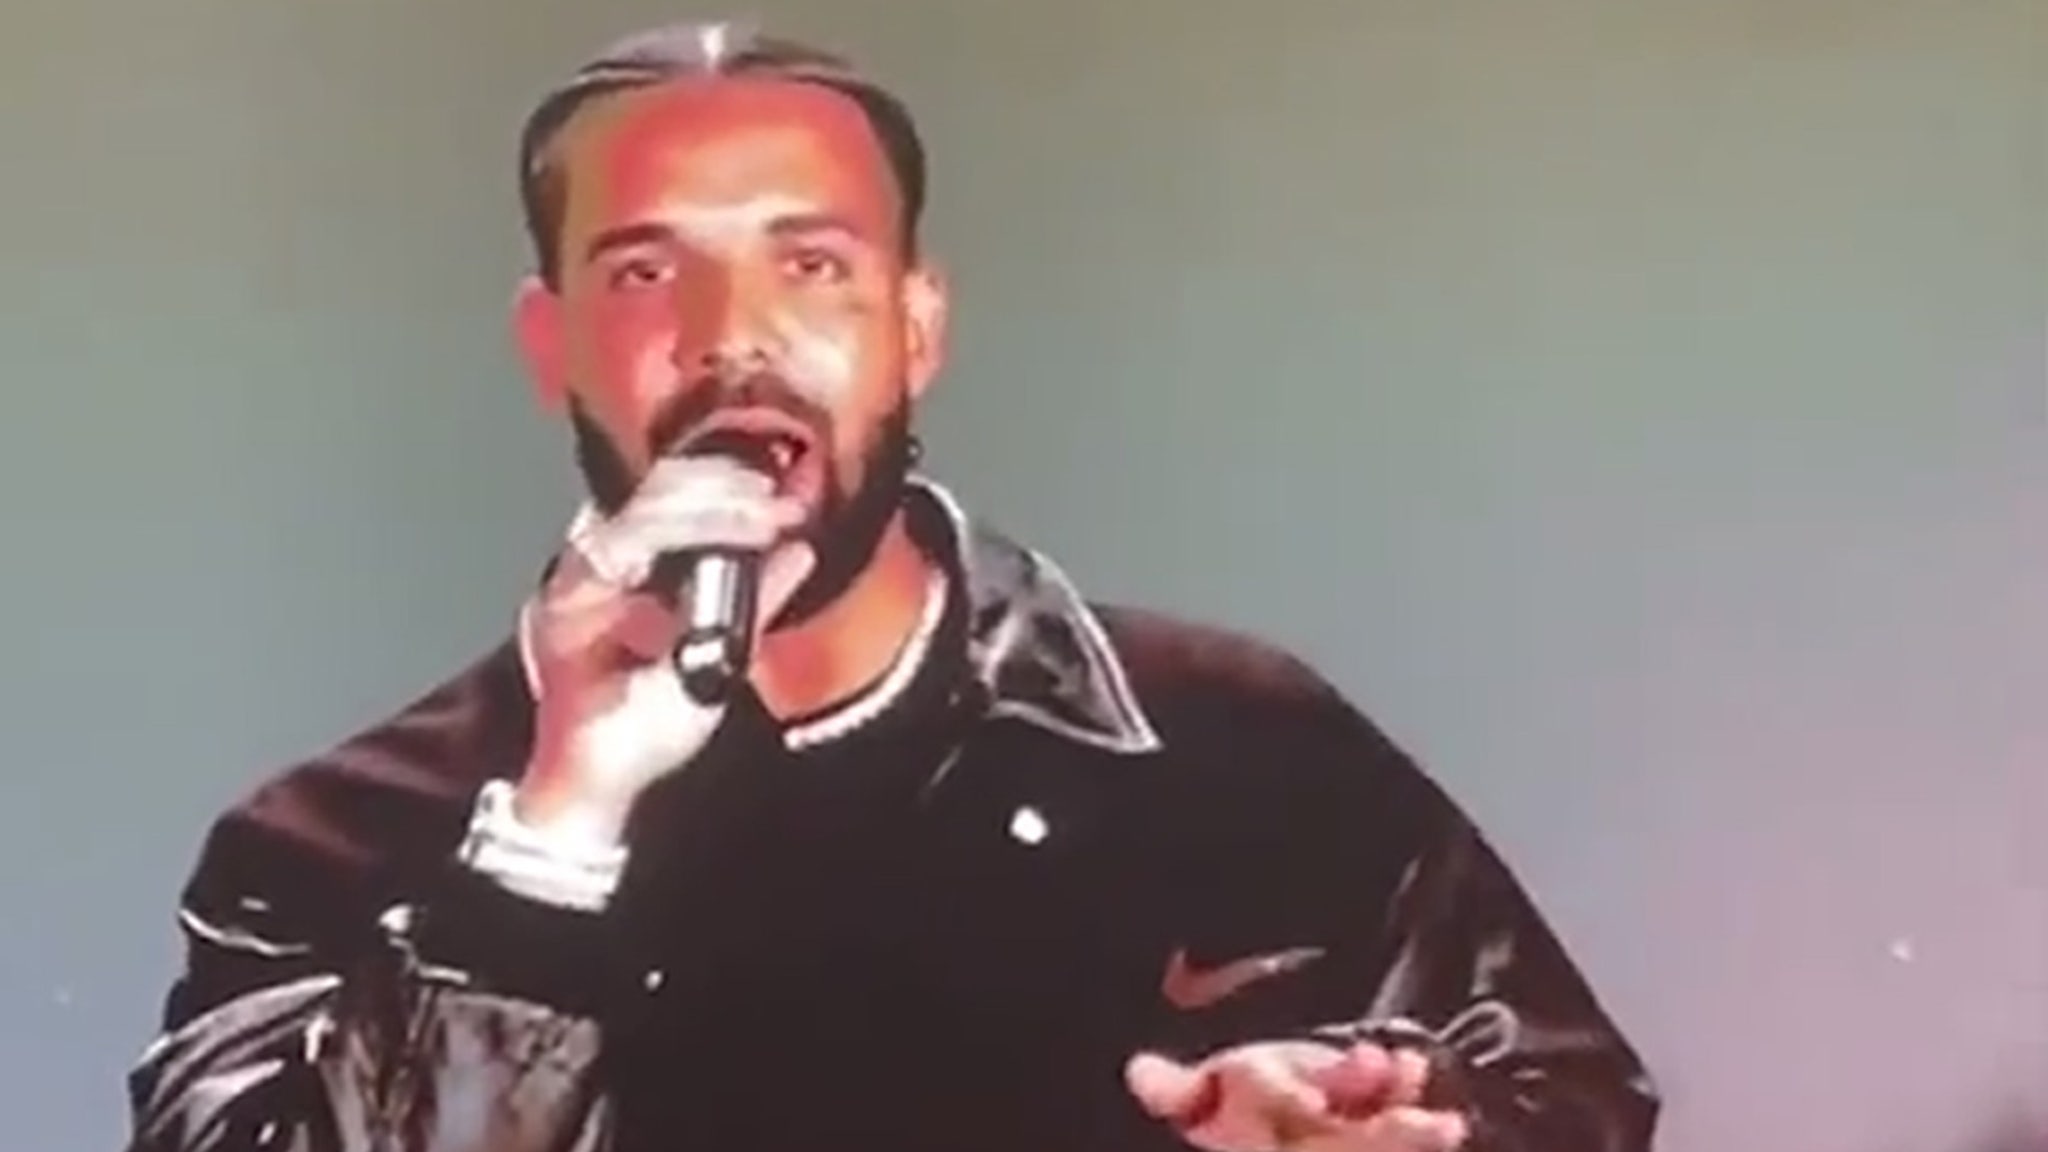 Drake Hosts Nike Maxim Awards and Delivers Super-Funny Monologue